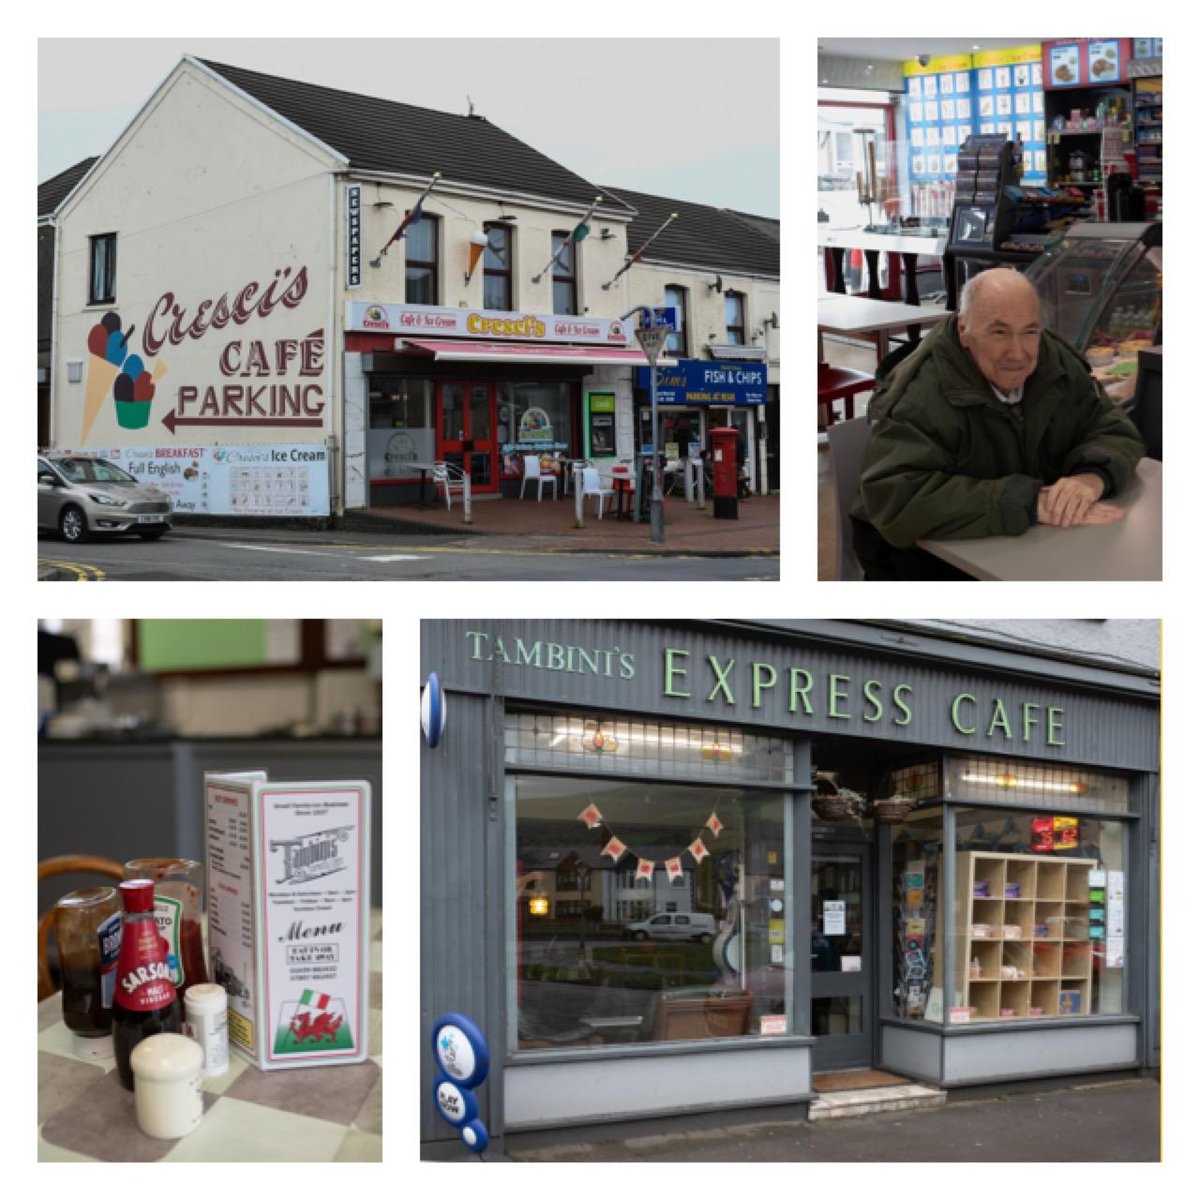 Italian cafes are important part of community in Wales.
We re-discover little Italy in Wales through #UntoldStoriesOfGlobalWelshHeritage project.

＃Thankstoyou
@HeritageFundCYM
@HeritageFundUK
@TNLUK
#wales #cymru